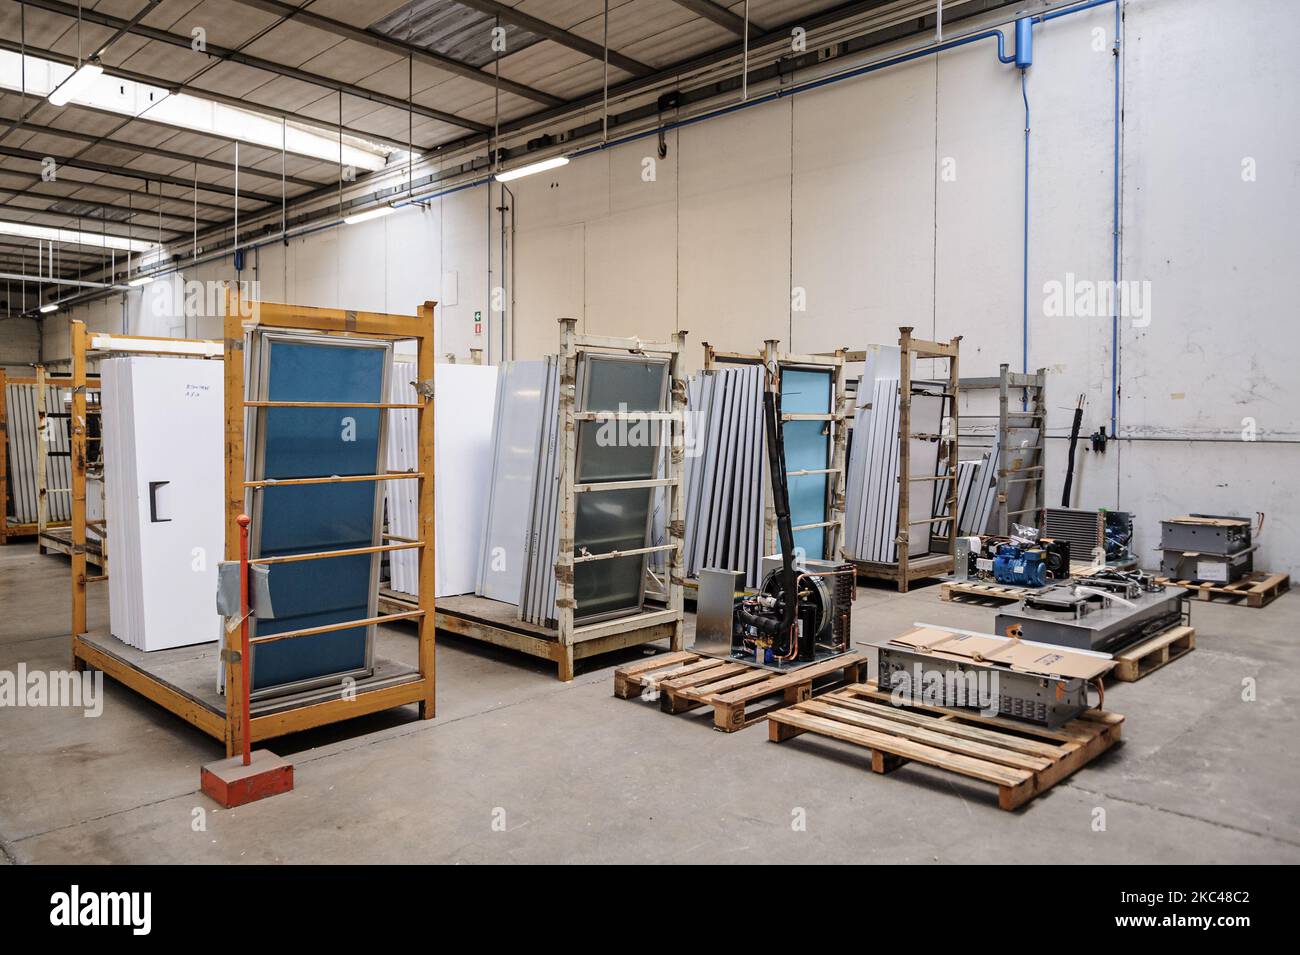 Refrigerators produced by the Italian company Desmon inside the industrial warehouse duo in Nusco in Avellino, southern Italy, on November 19, 2020. Desmon is a company from southern Italy, and works in the refrigeration sector, and will be the producer of the new transport and refrigerated storage system for the new American vaccine of the company Pfizer against the Covid-19 virus, which requires it to be stored at a temperature of -80 C, an extreme specification that only the Italian company Desmon has been able to complete with its two refrigeration systems, one for transport that manages t Stock Photo